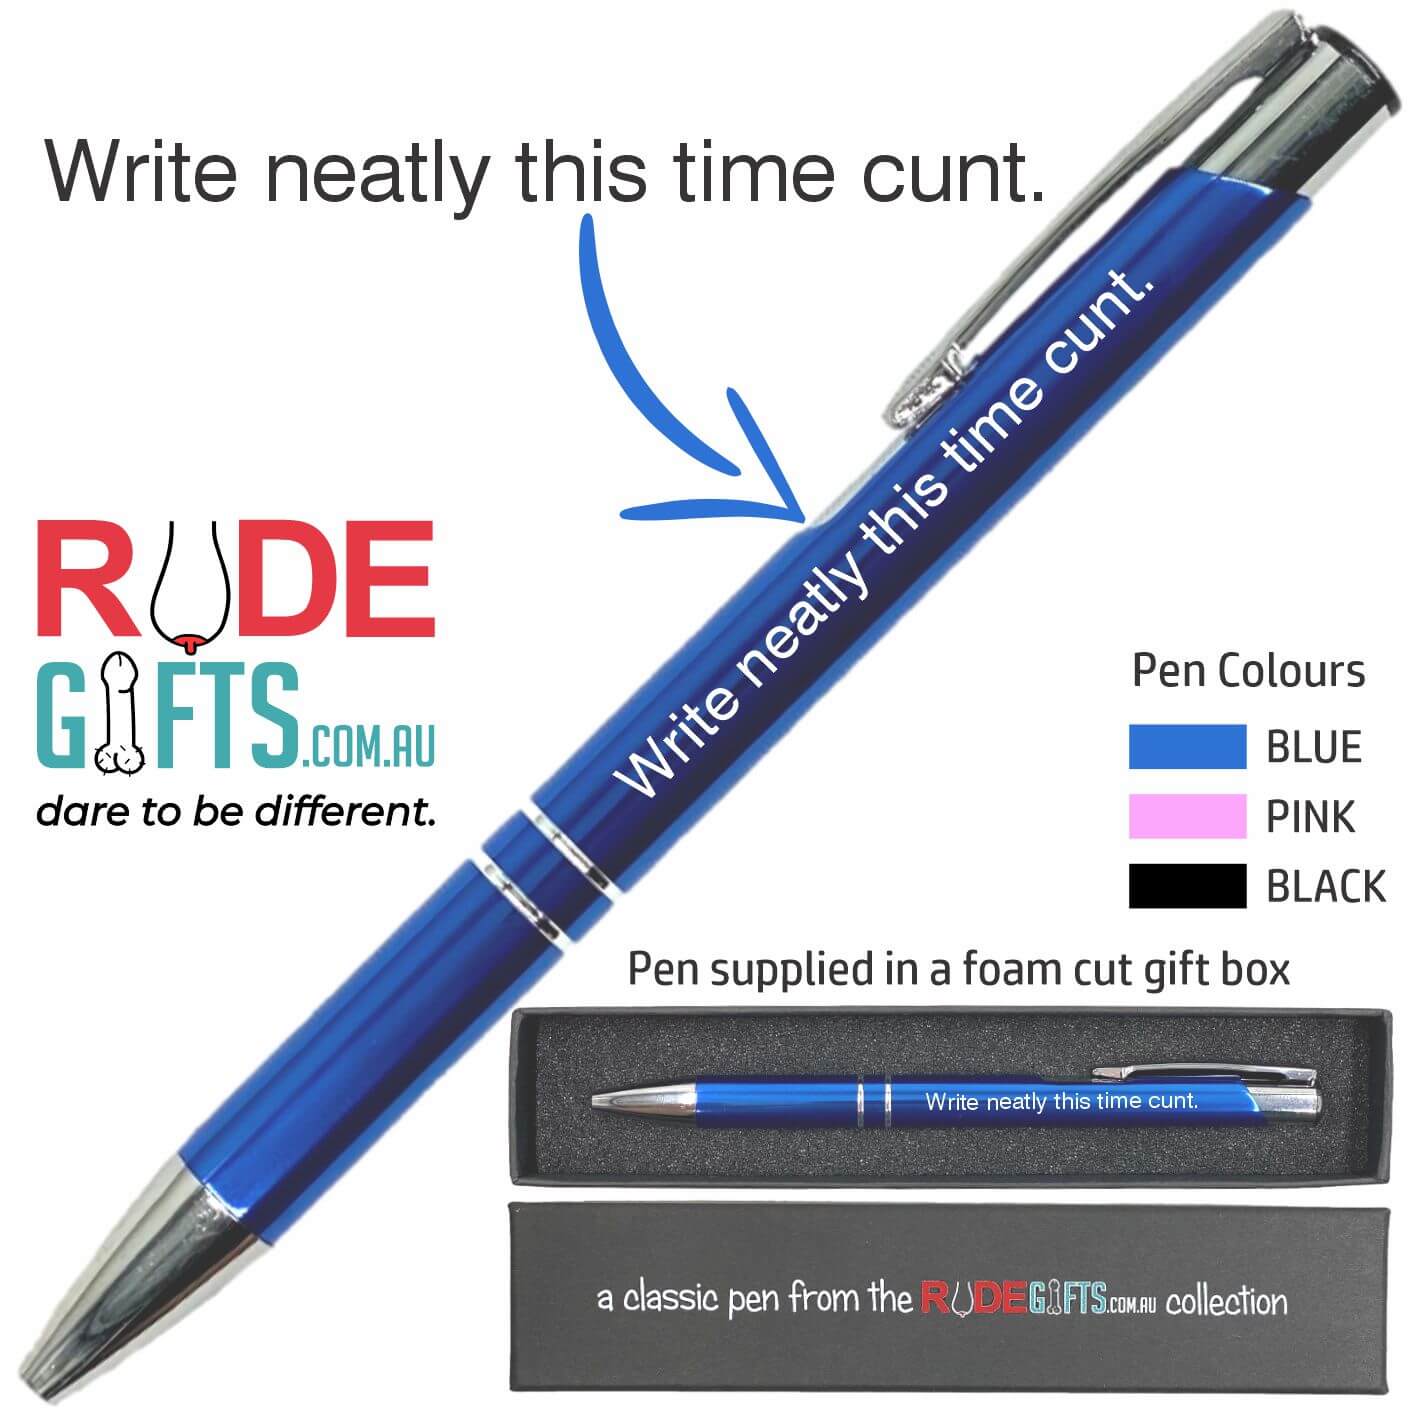 Write neatly this time cunt.